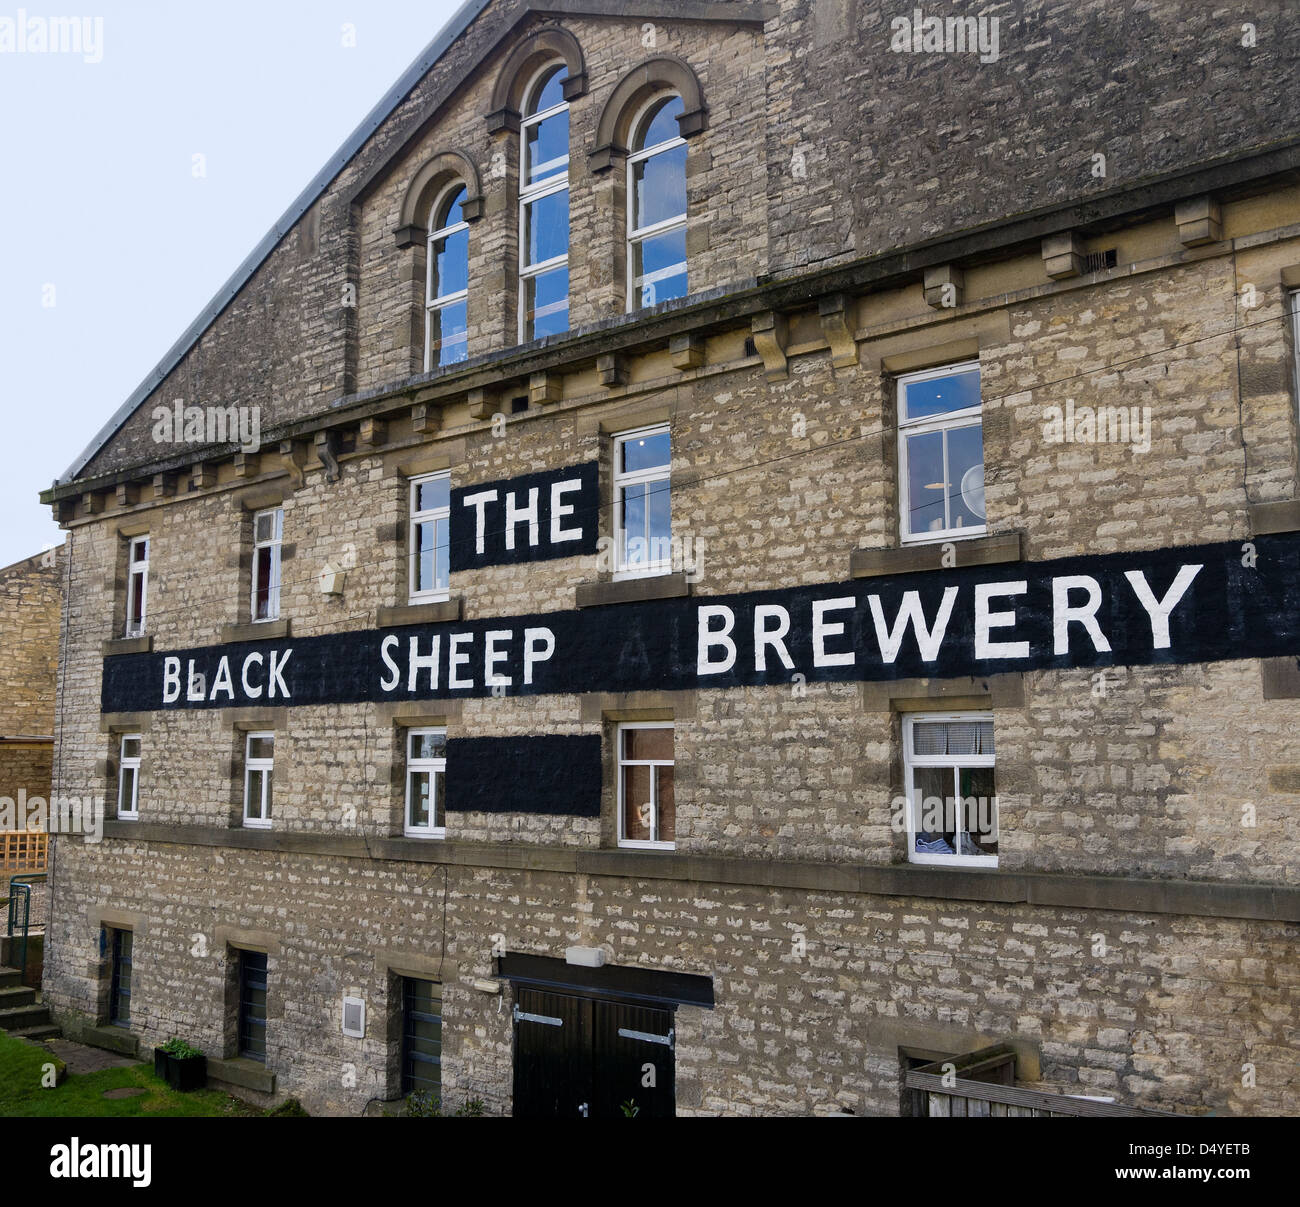 The Black Sheep Brewery in the Village of Masham in North Yorkshire England Stock Photo